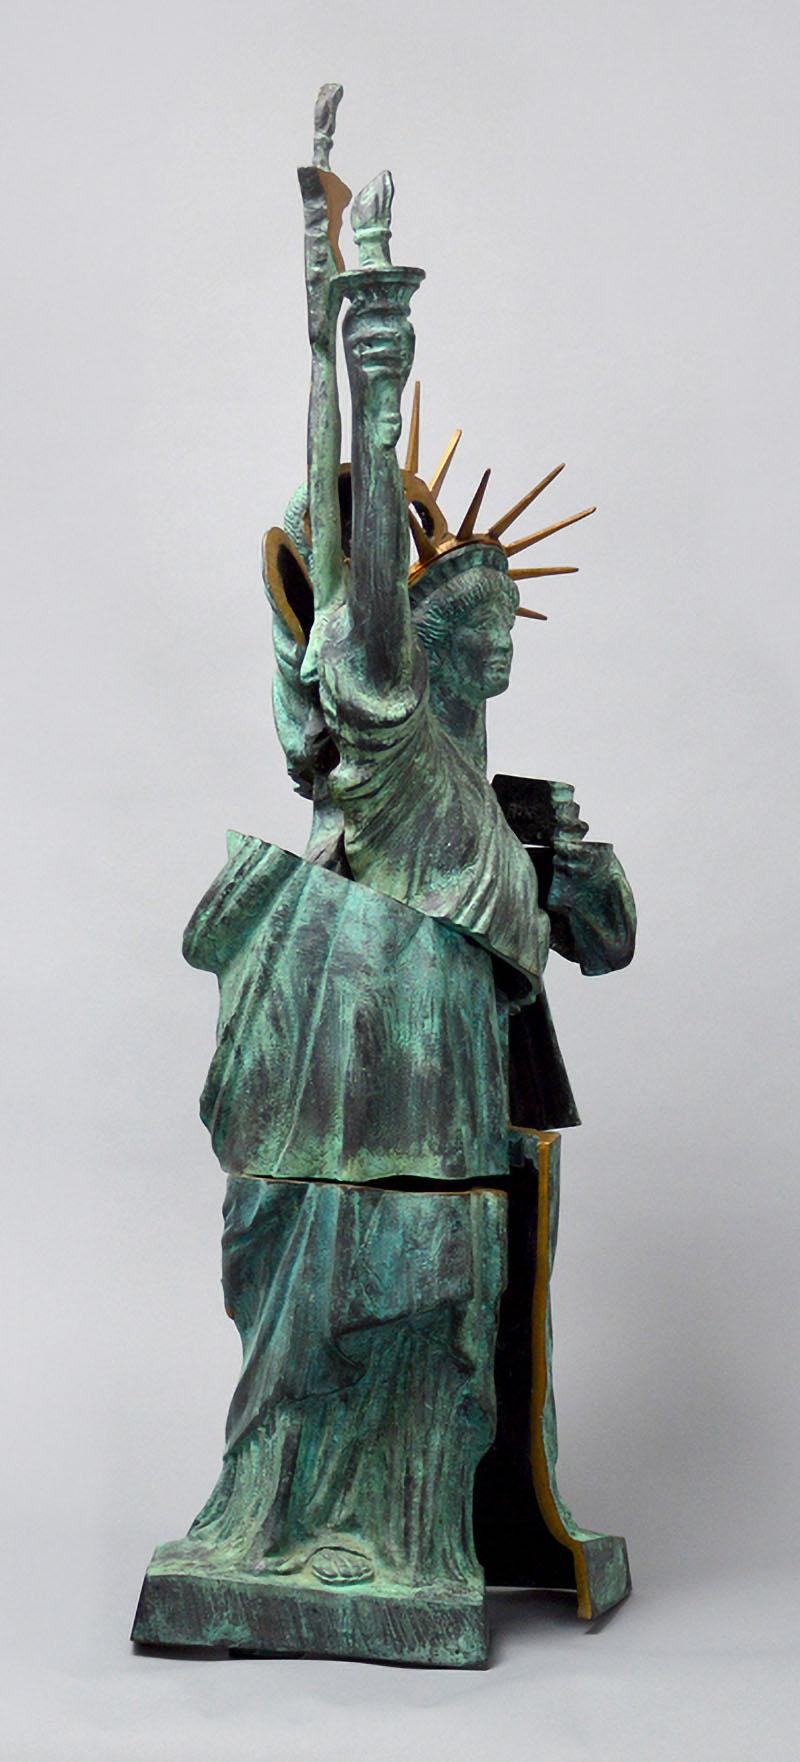 Statue of Liberty - Sculpture by Arman